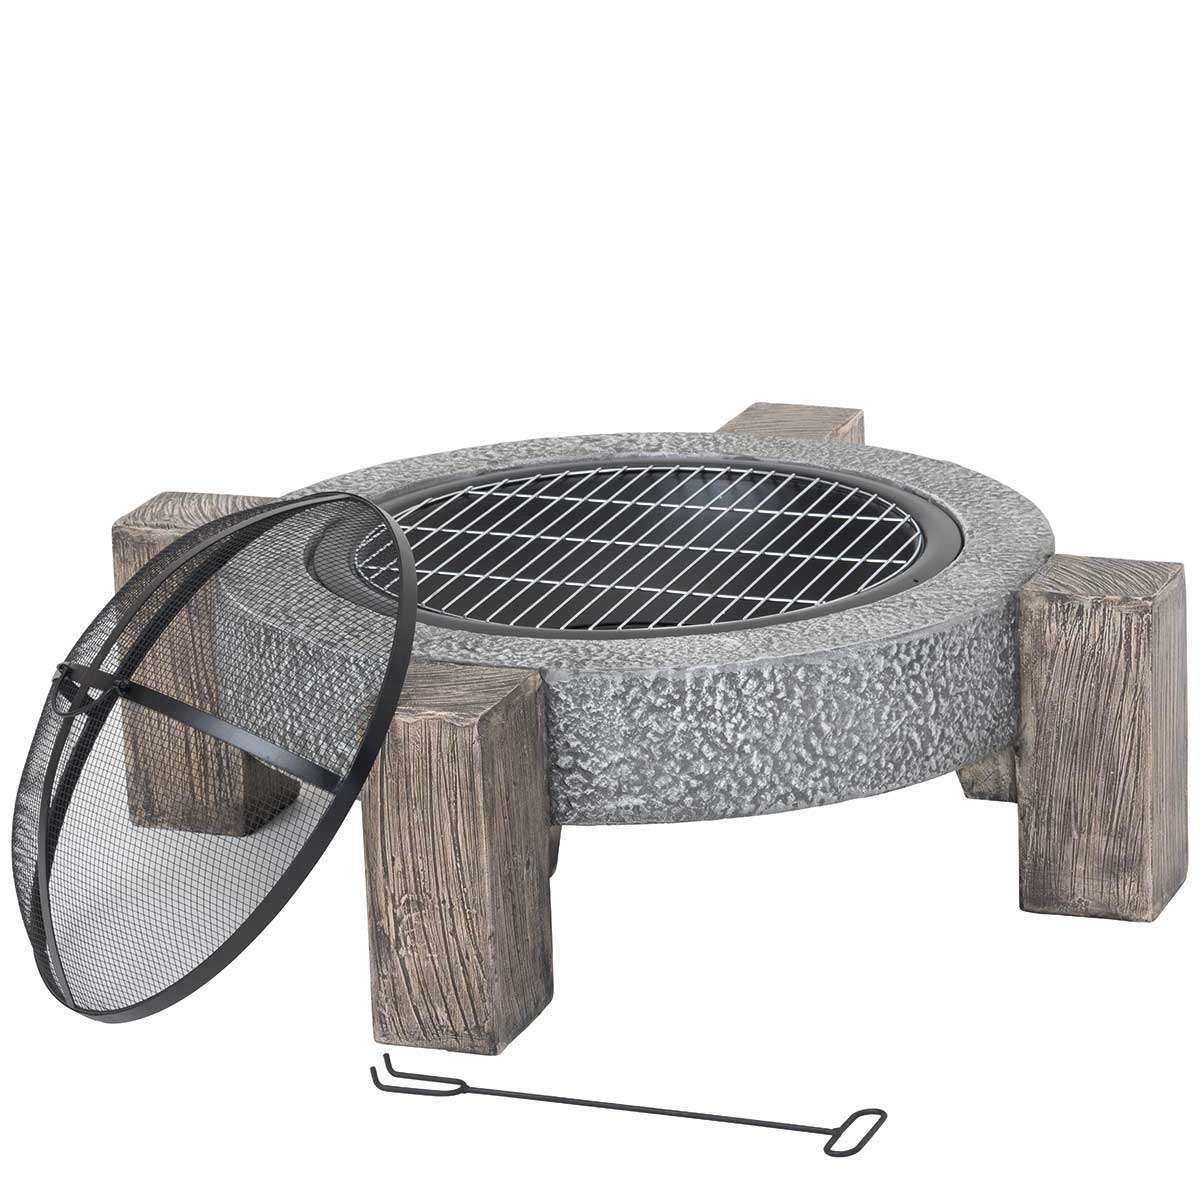 Exceptional Garden:Lifestyle Calida MGO Fire Pit